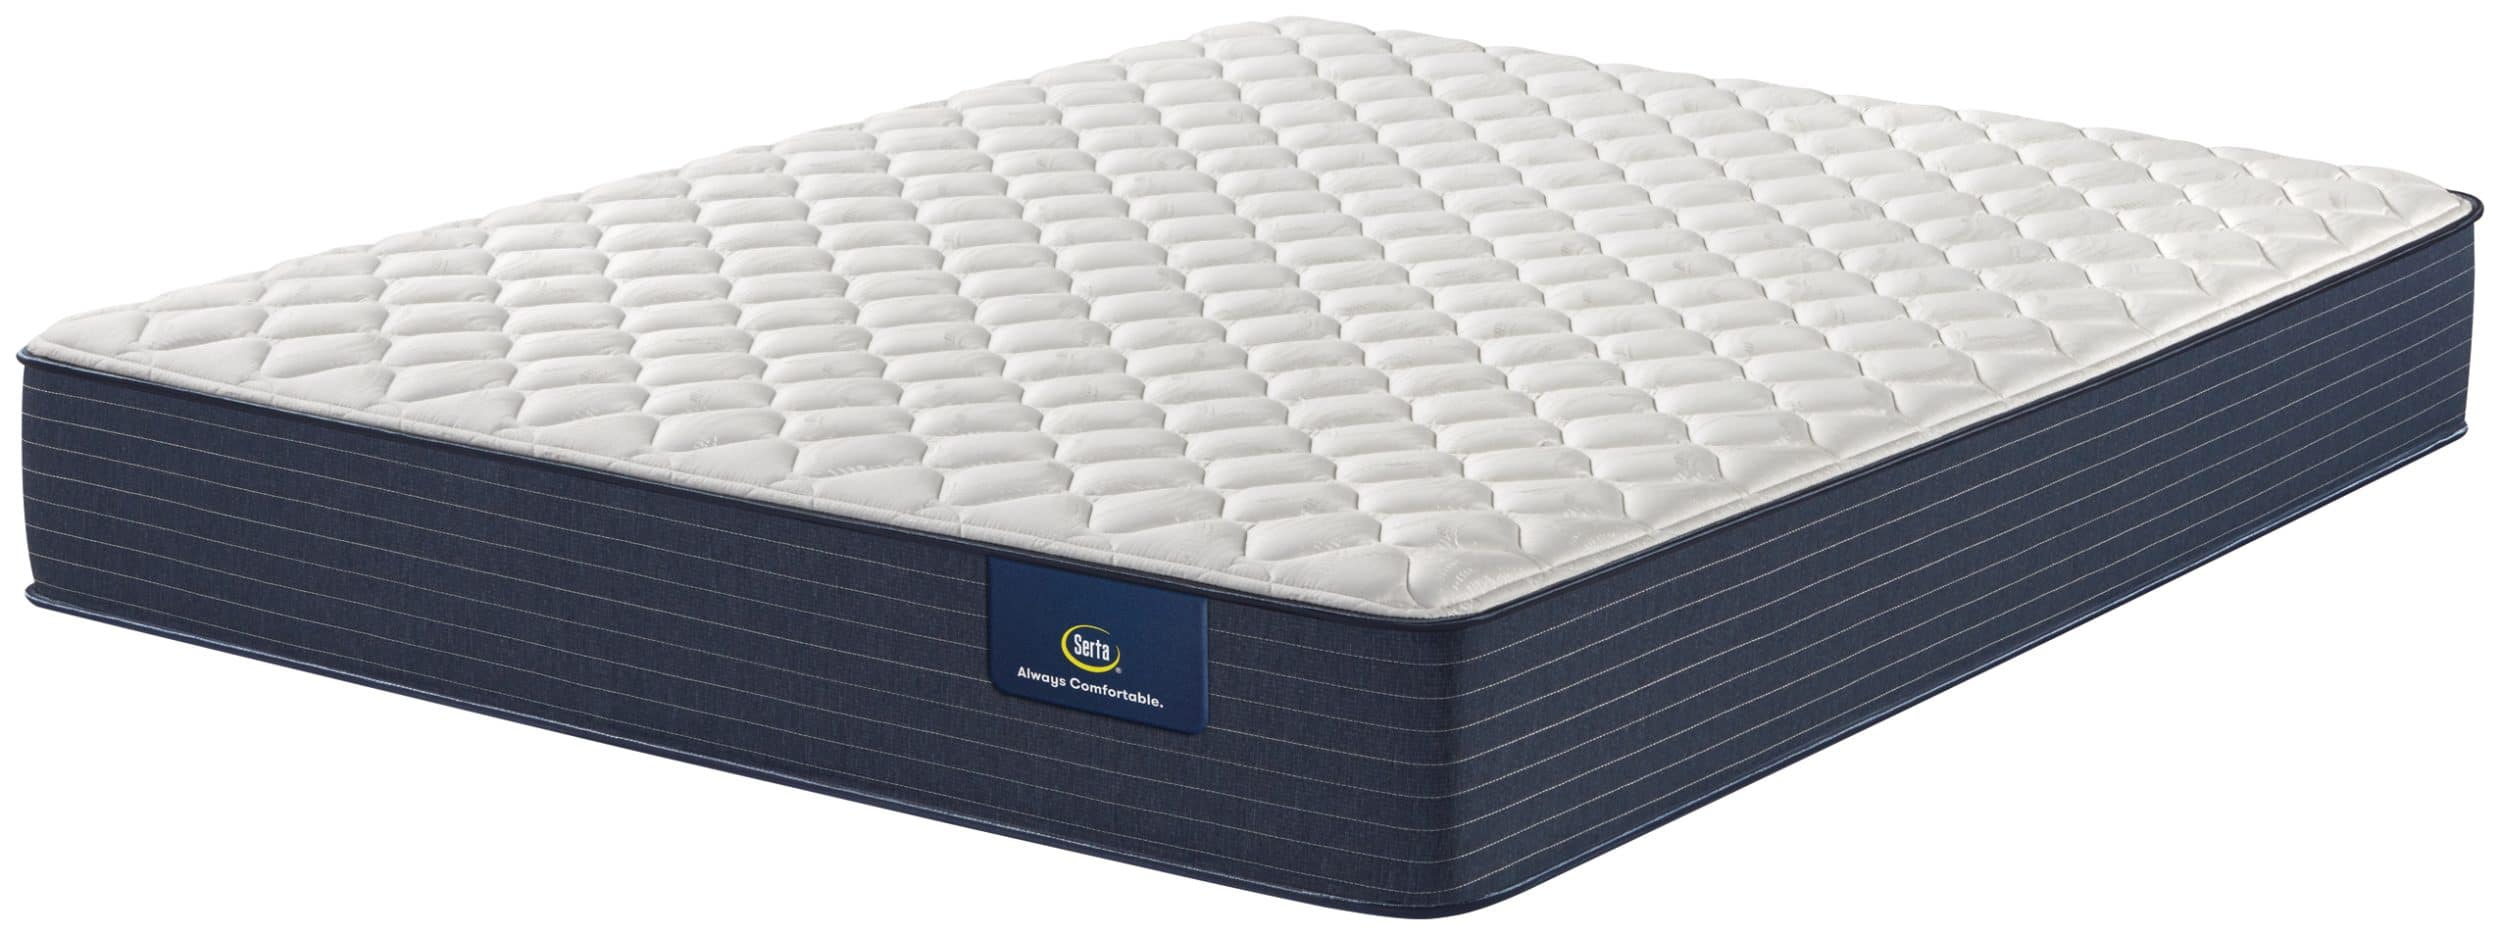 Photo of a Serta mattress with black sides and white quilted top